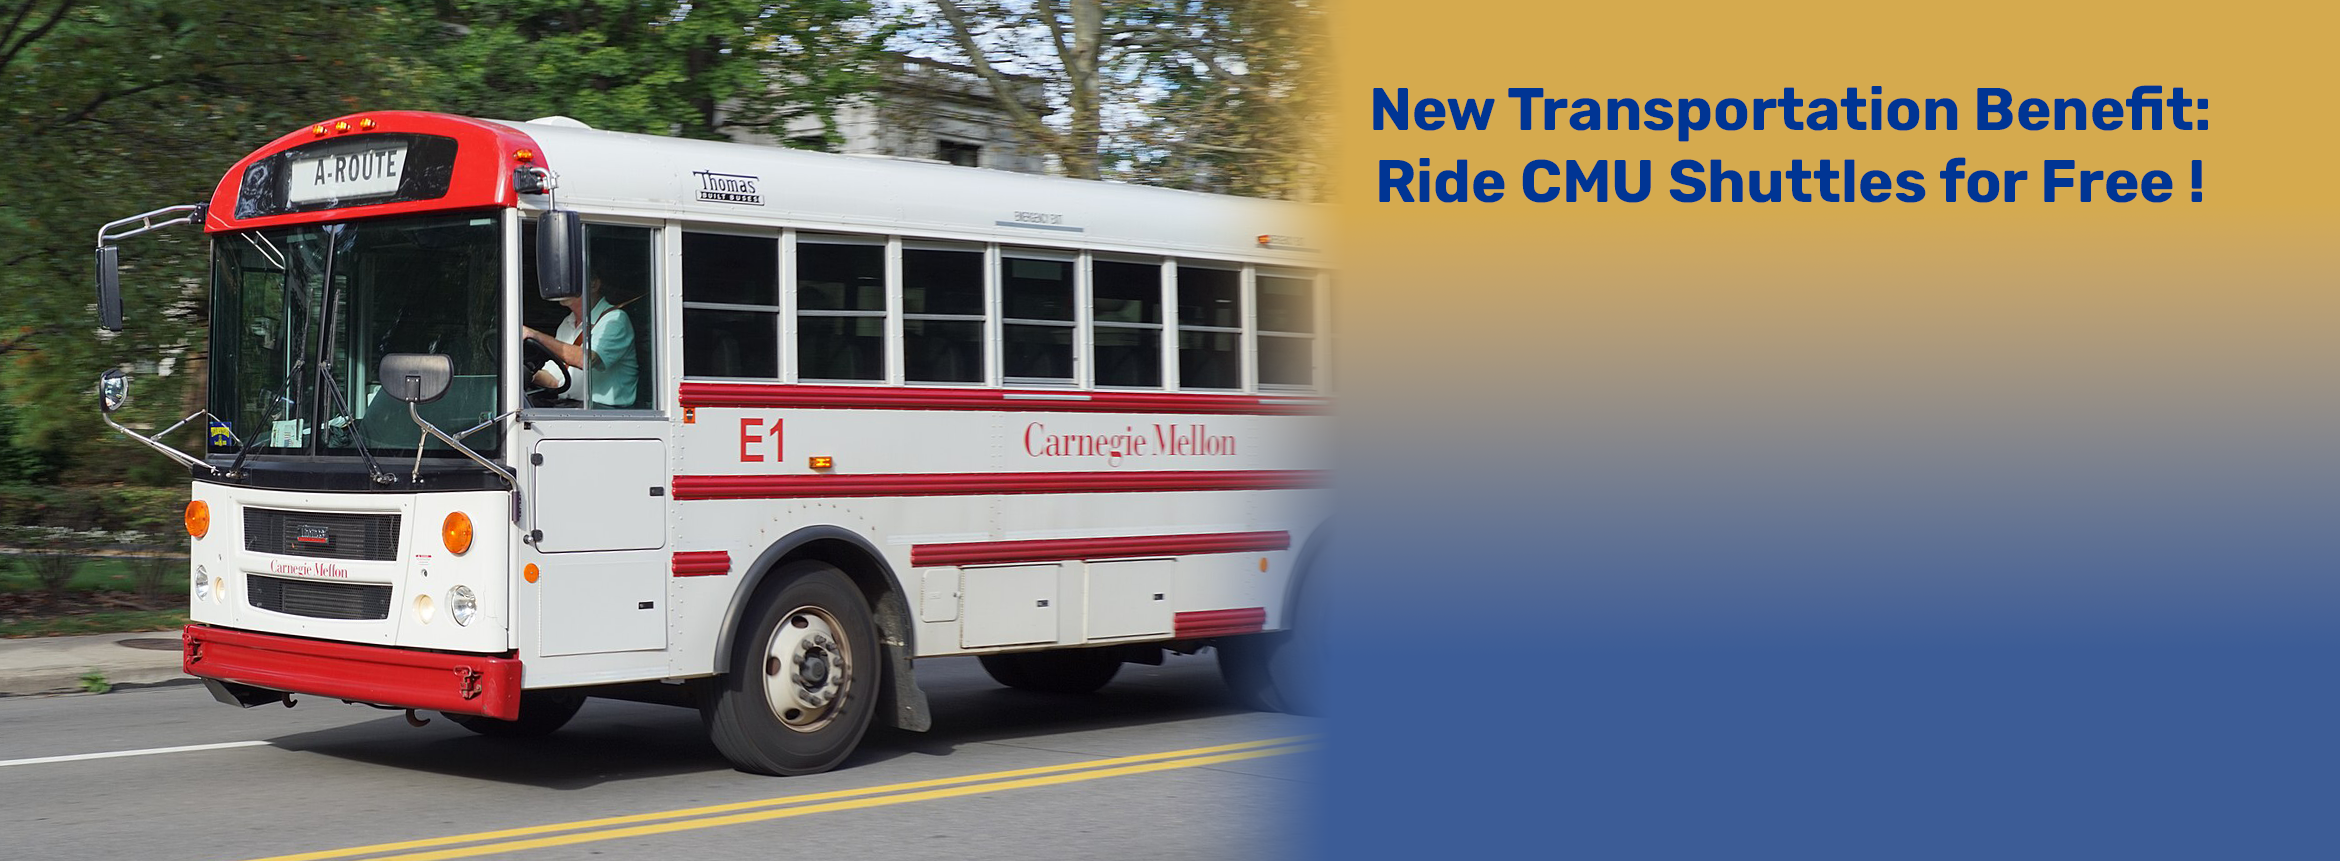 Carnegie Mellon Shuttle Bus with text: New Transportation Benefit: Ride CMU Shuttles for Free!